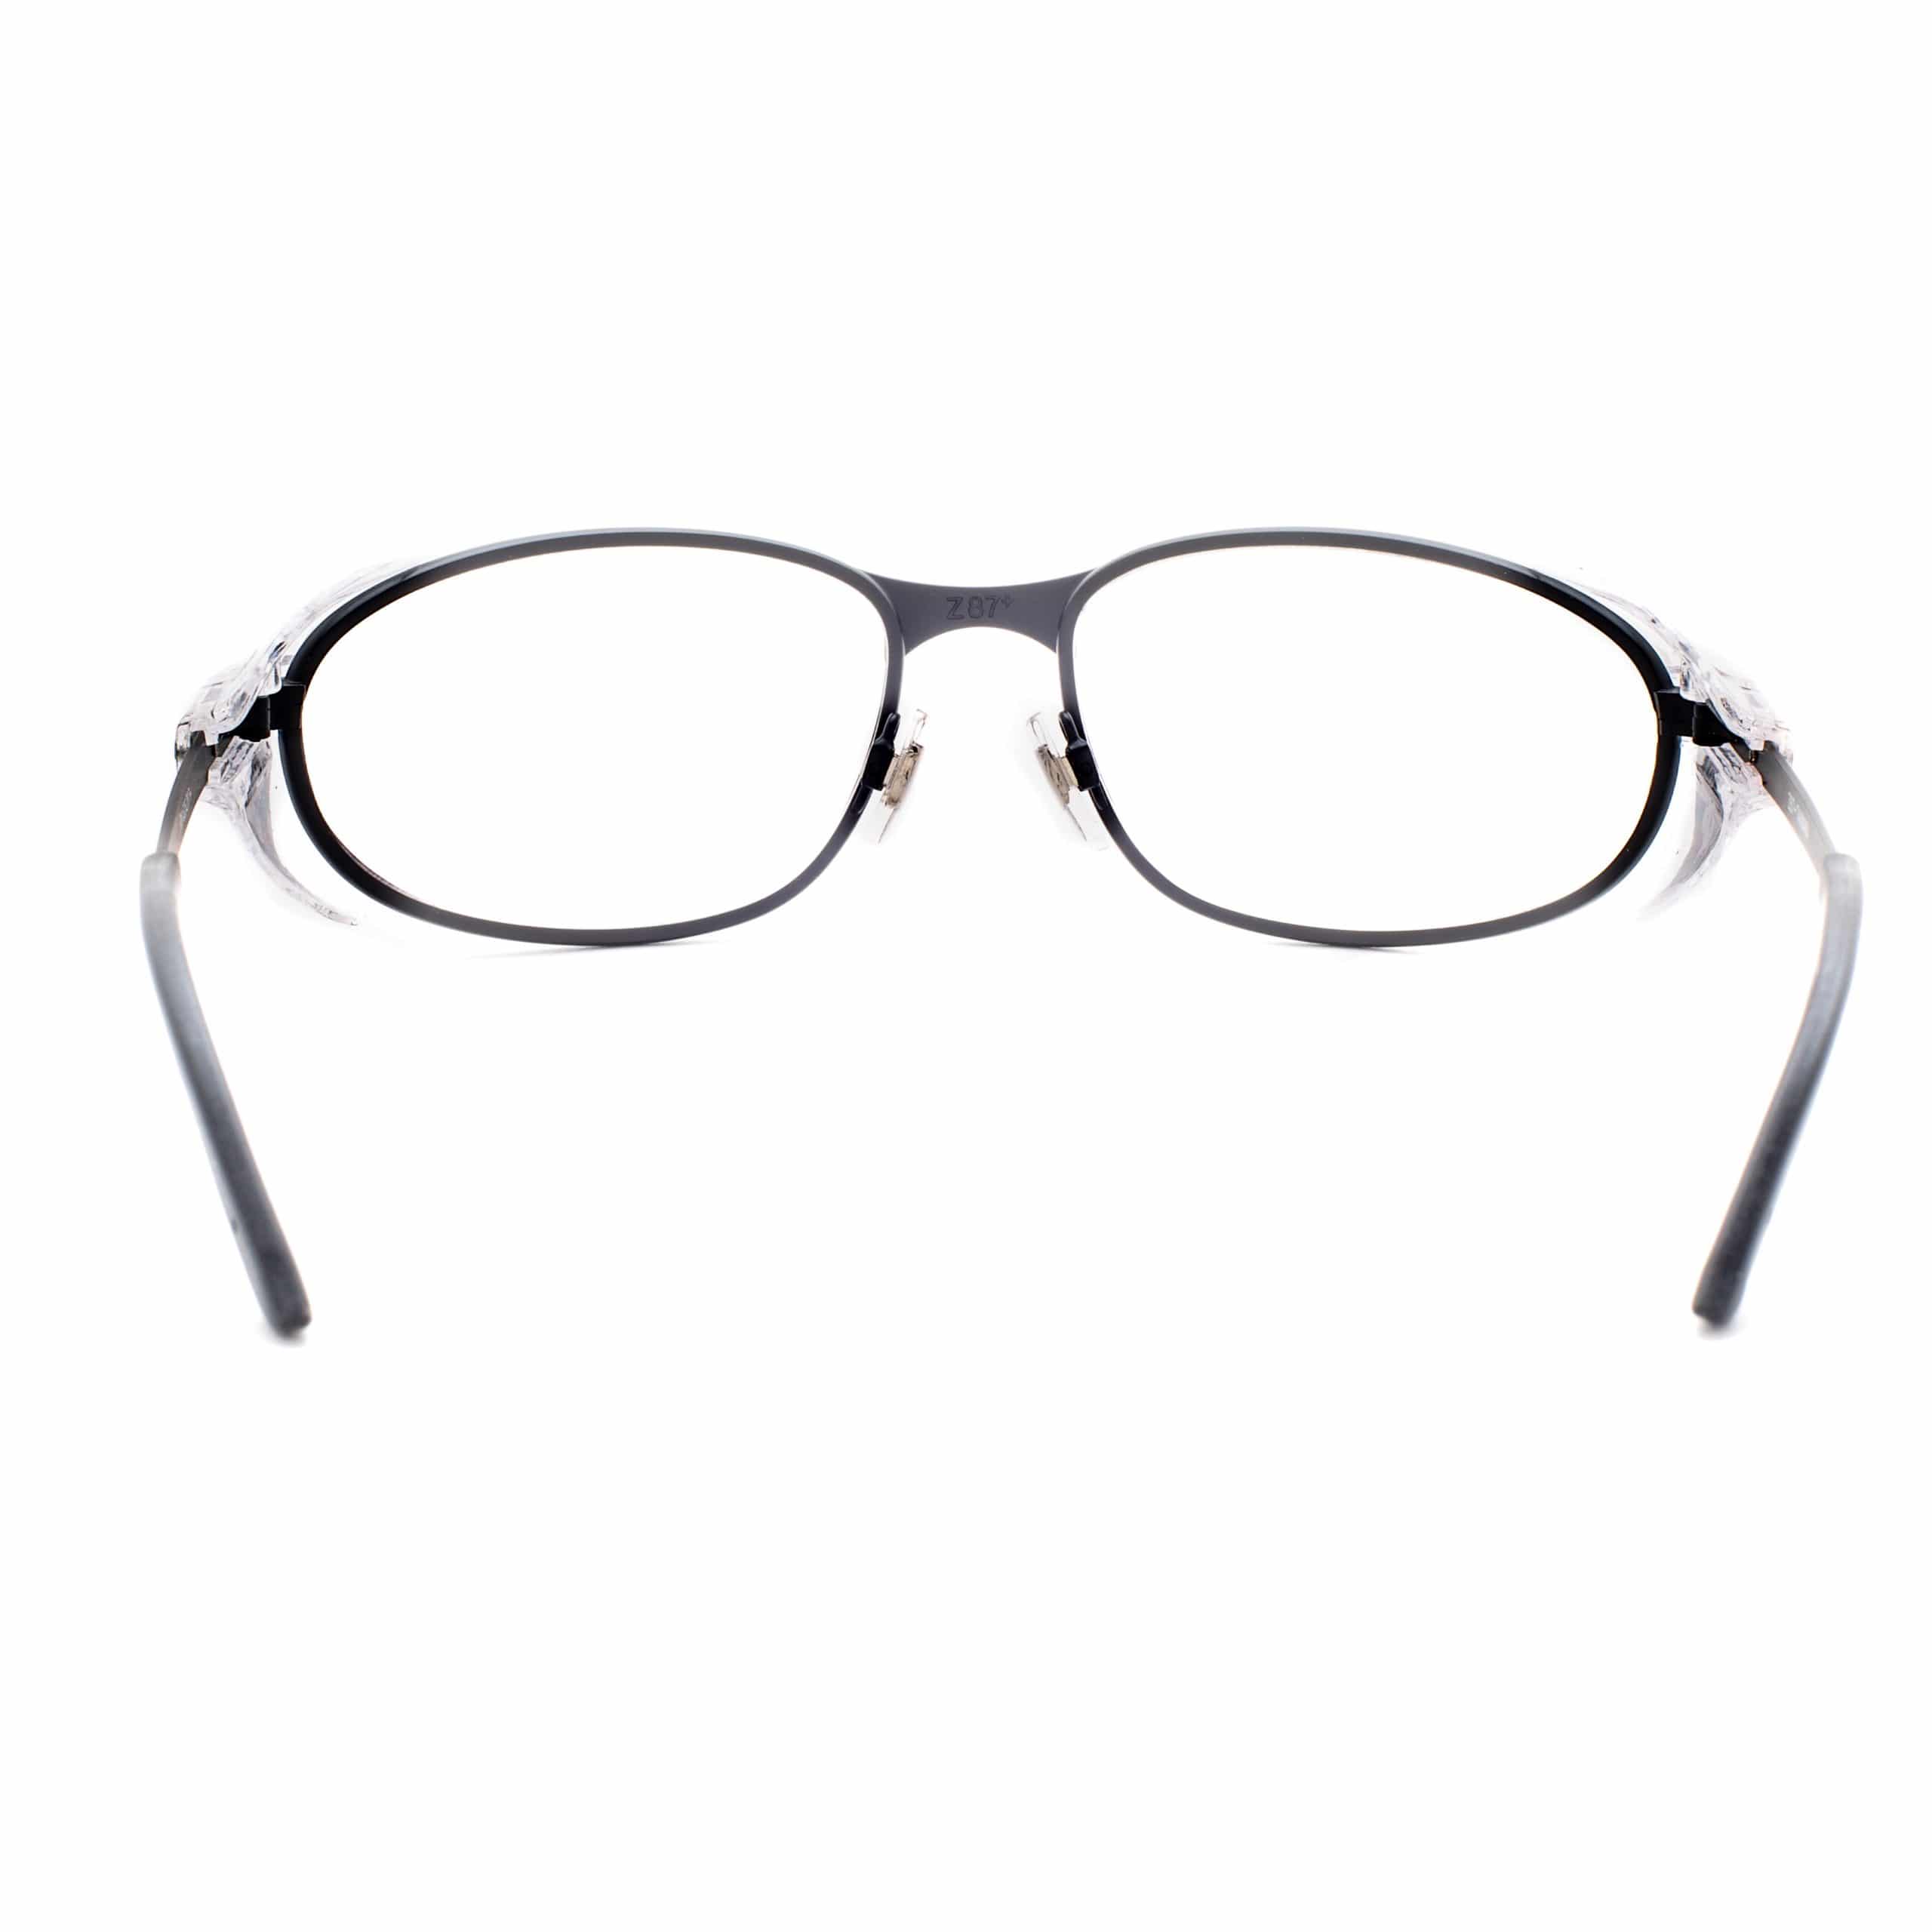 Prescription Safety Glasses RX-525 - Safety Protection Glasses